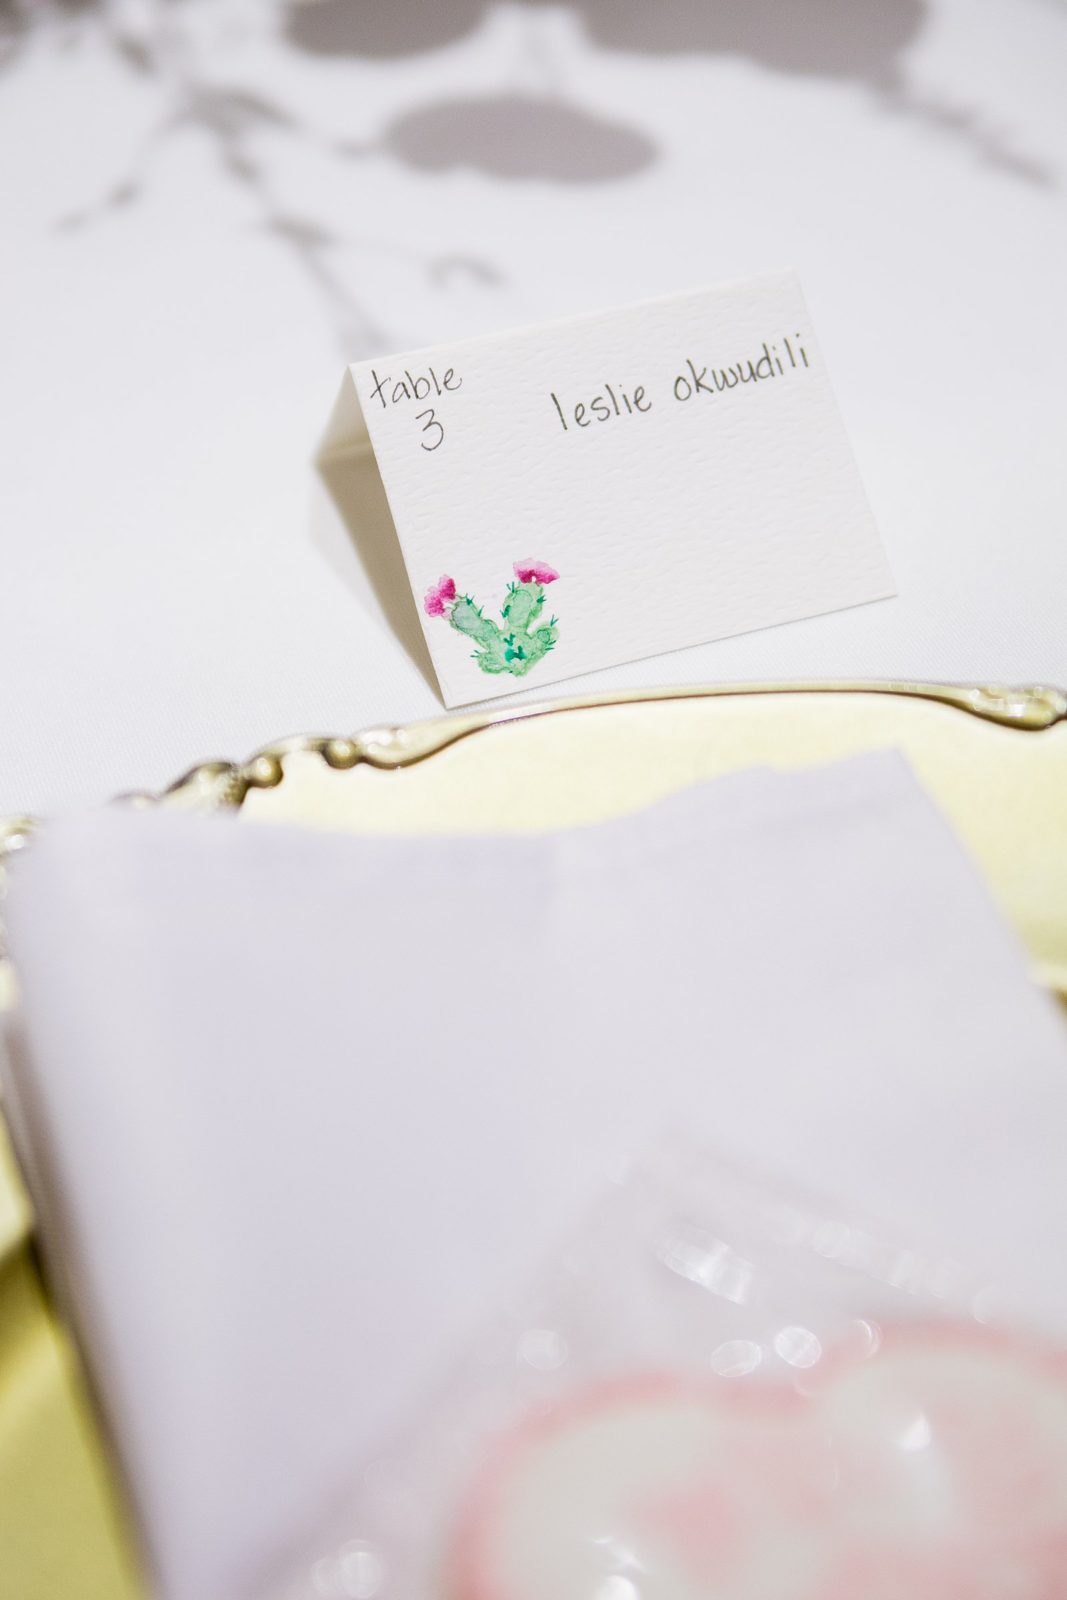 Hand painted watercolor prickly pear place cards at Arizona Heritage Center at Papago Park wedding reception by Temepe wedding photographer PMA Photography.